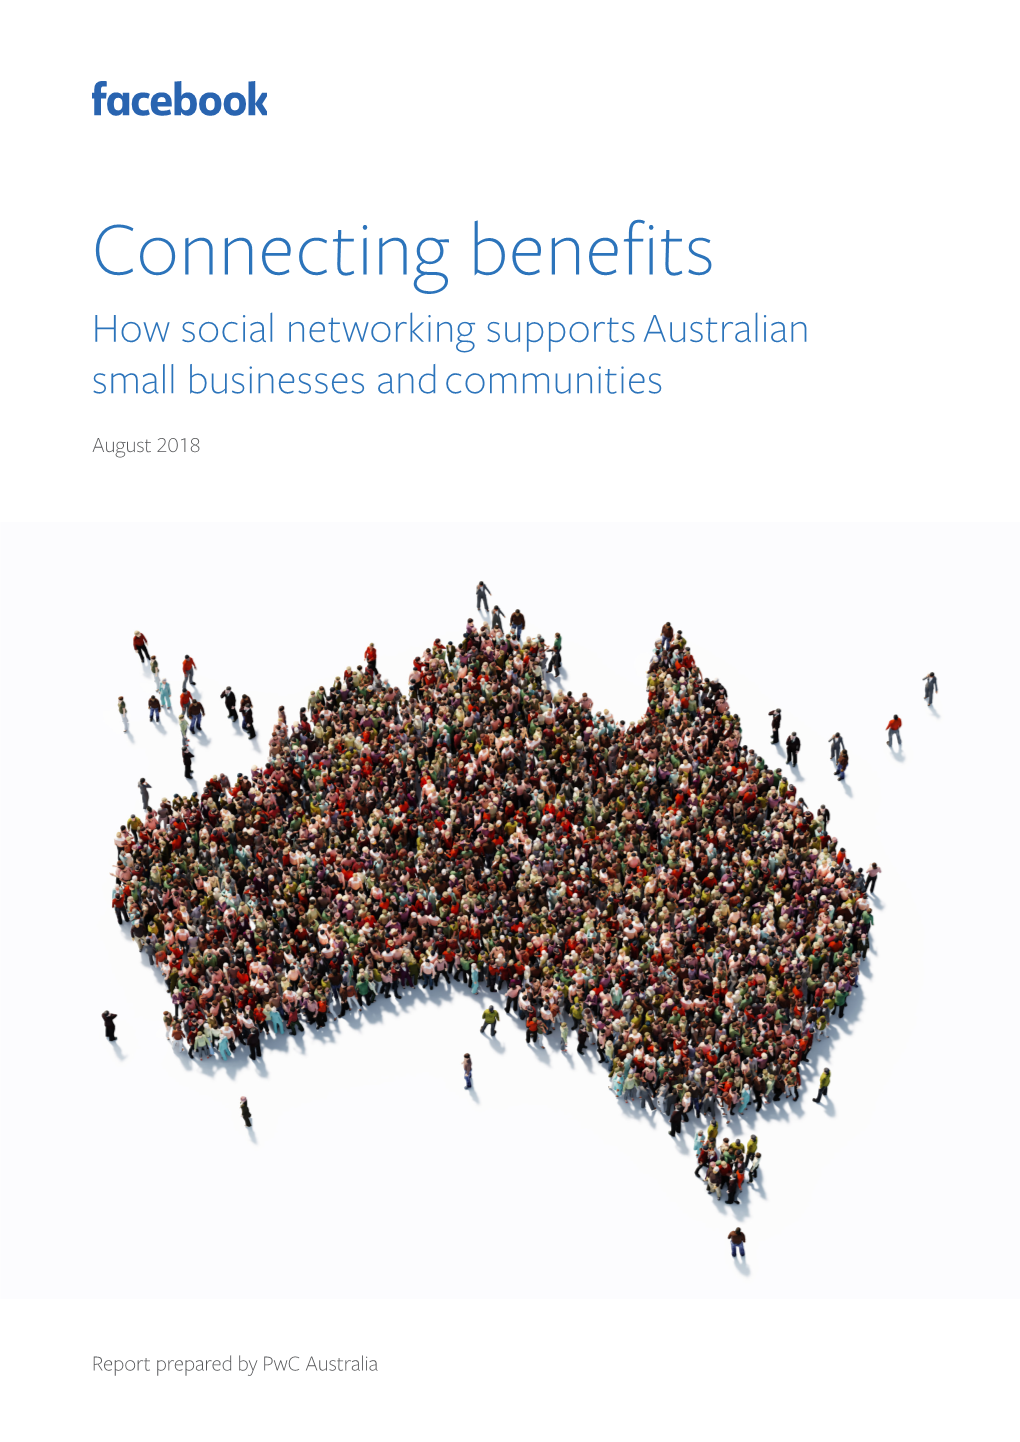 Connecting Benefits How Social Networking Supports Australian Small Businesses and Communities